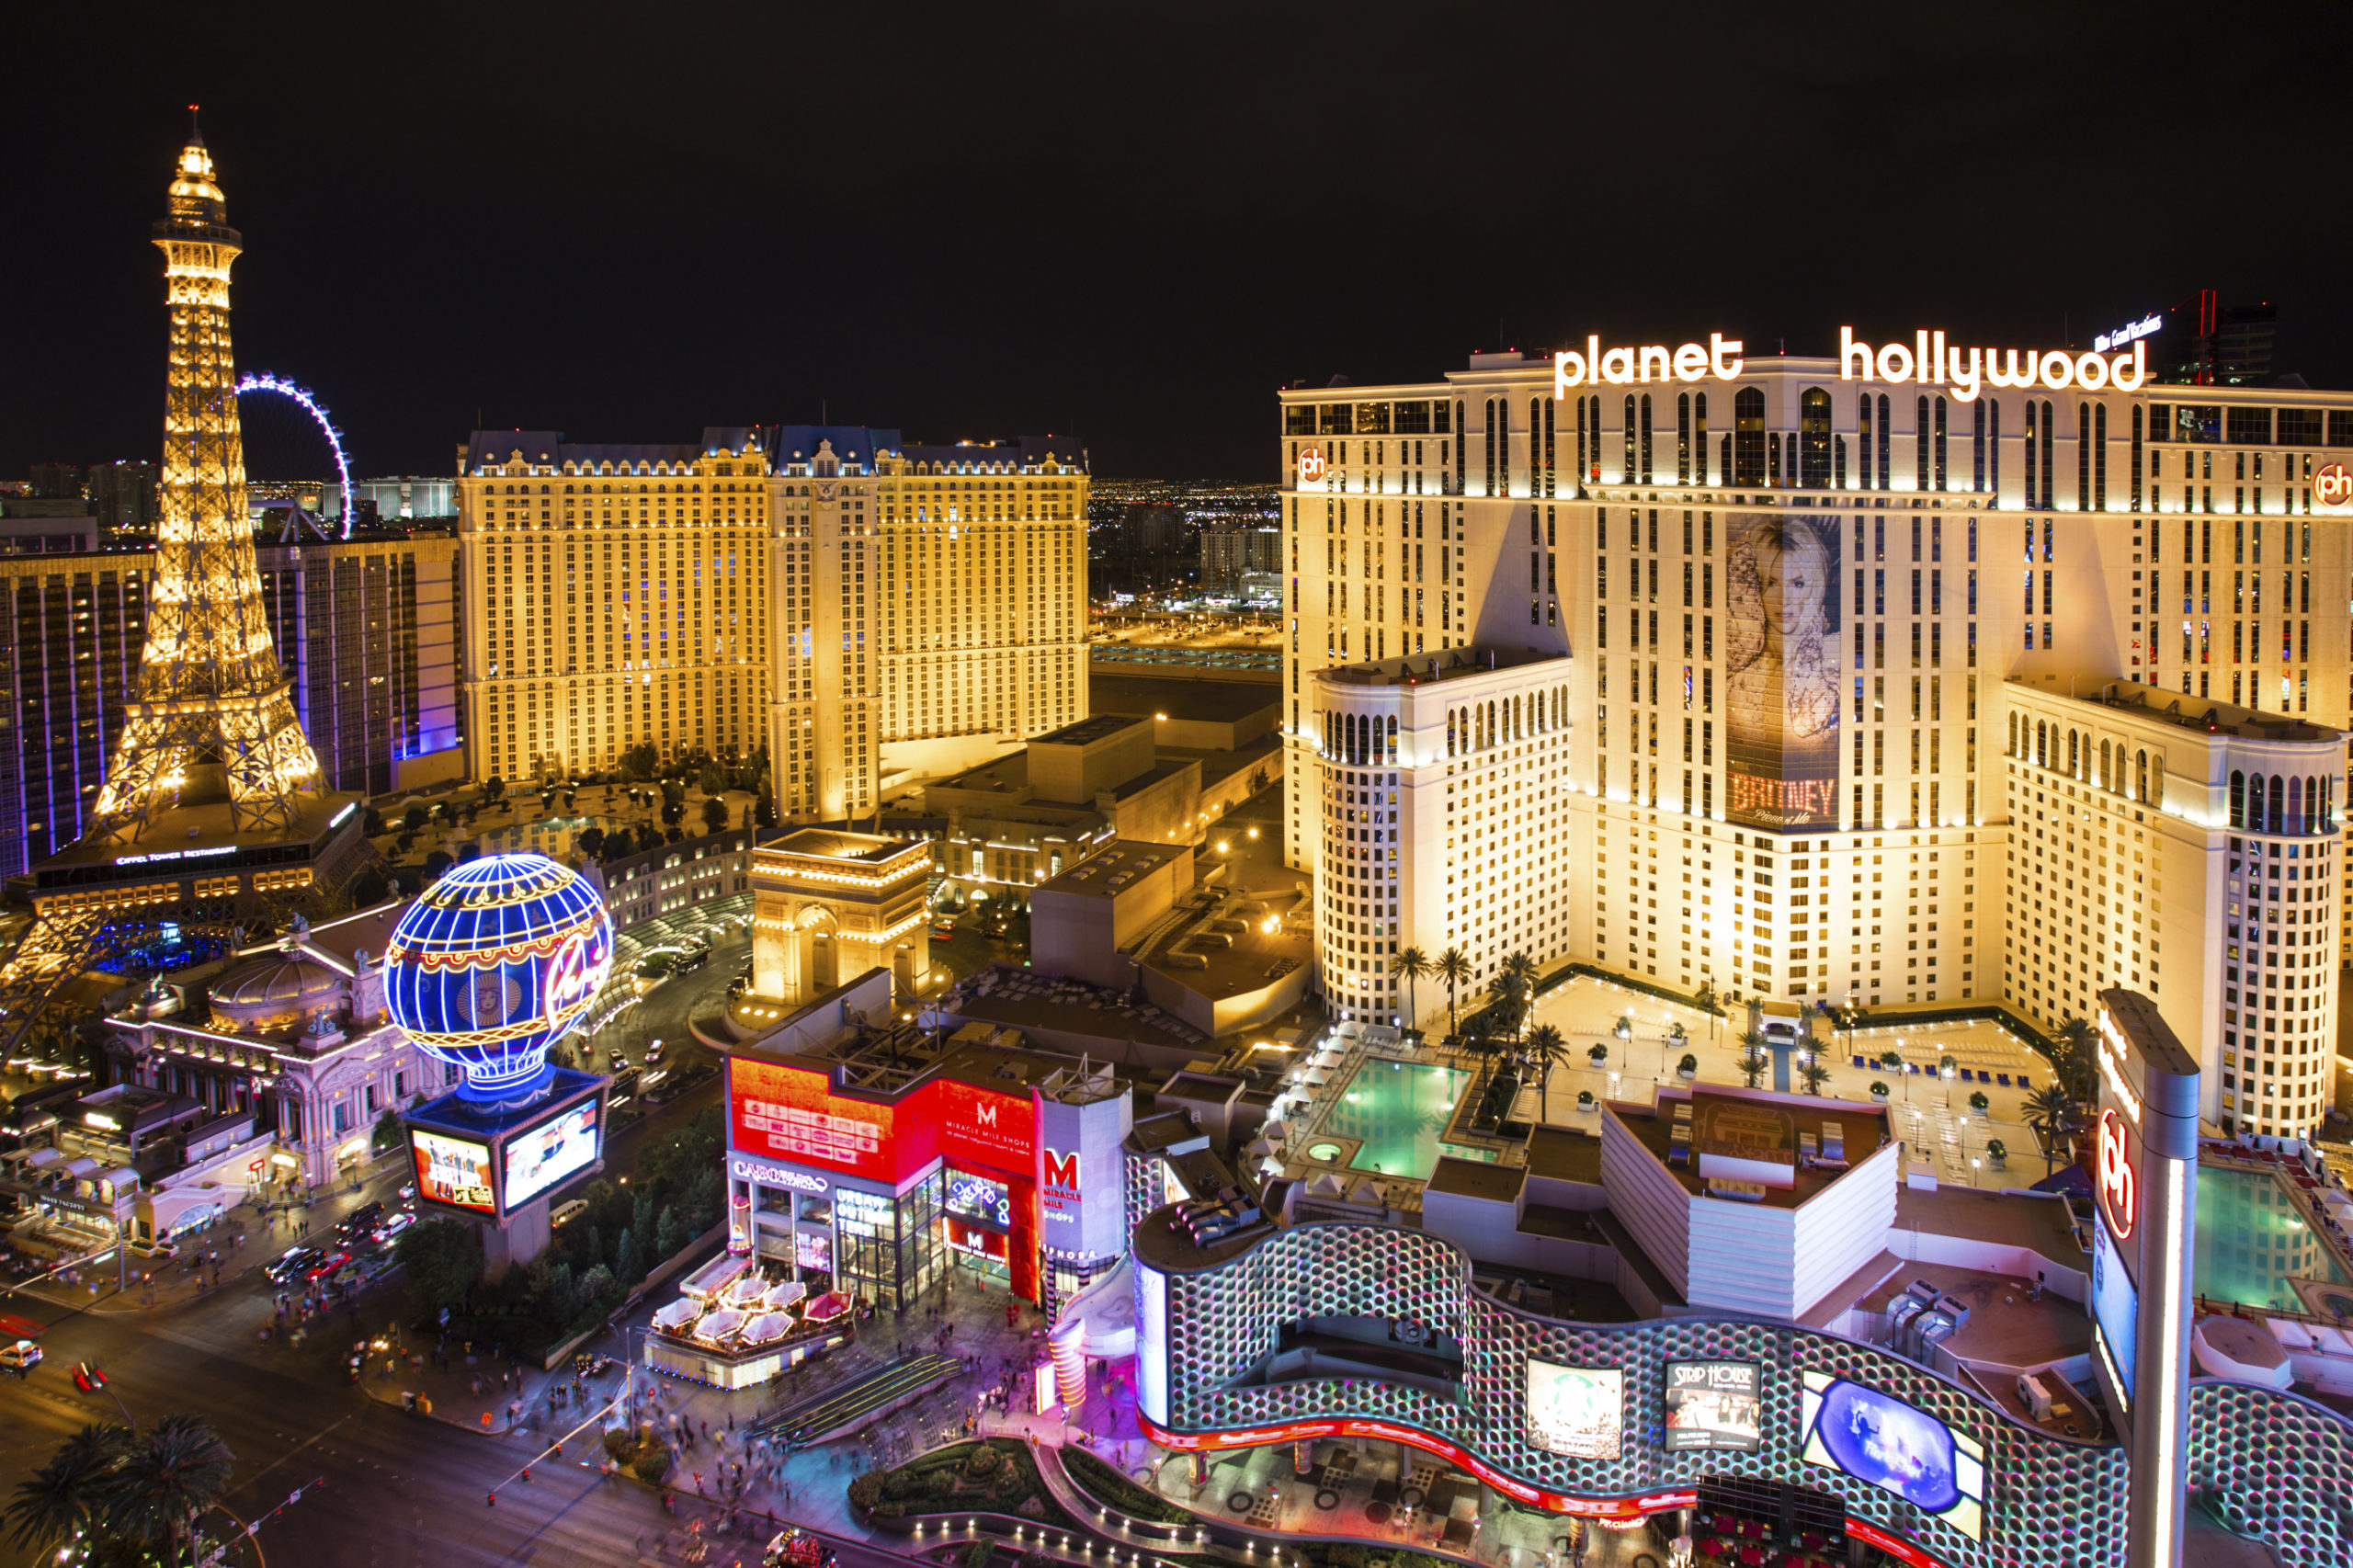 The dazzling neon lights of the Las Vegas Strip illuminate the hotels, fountains, casinos and eateries